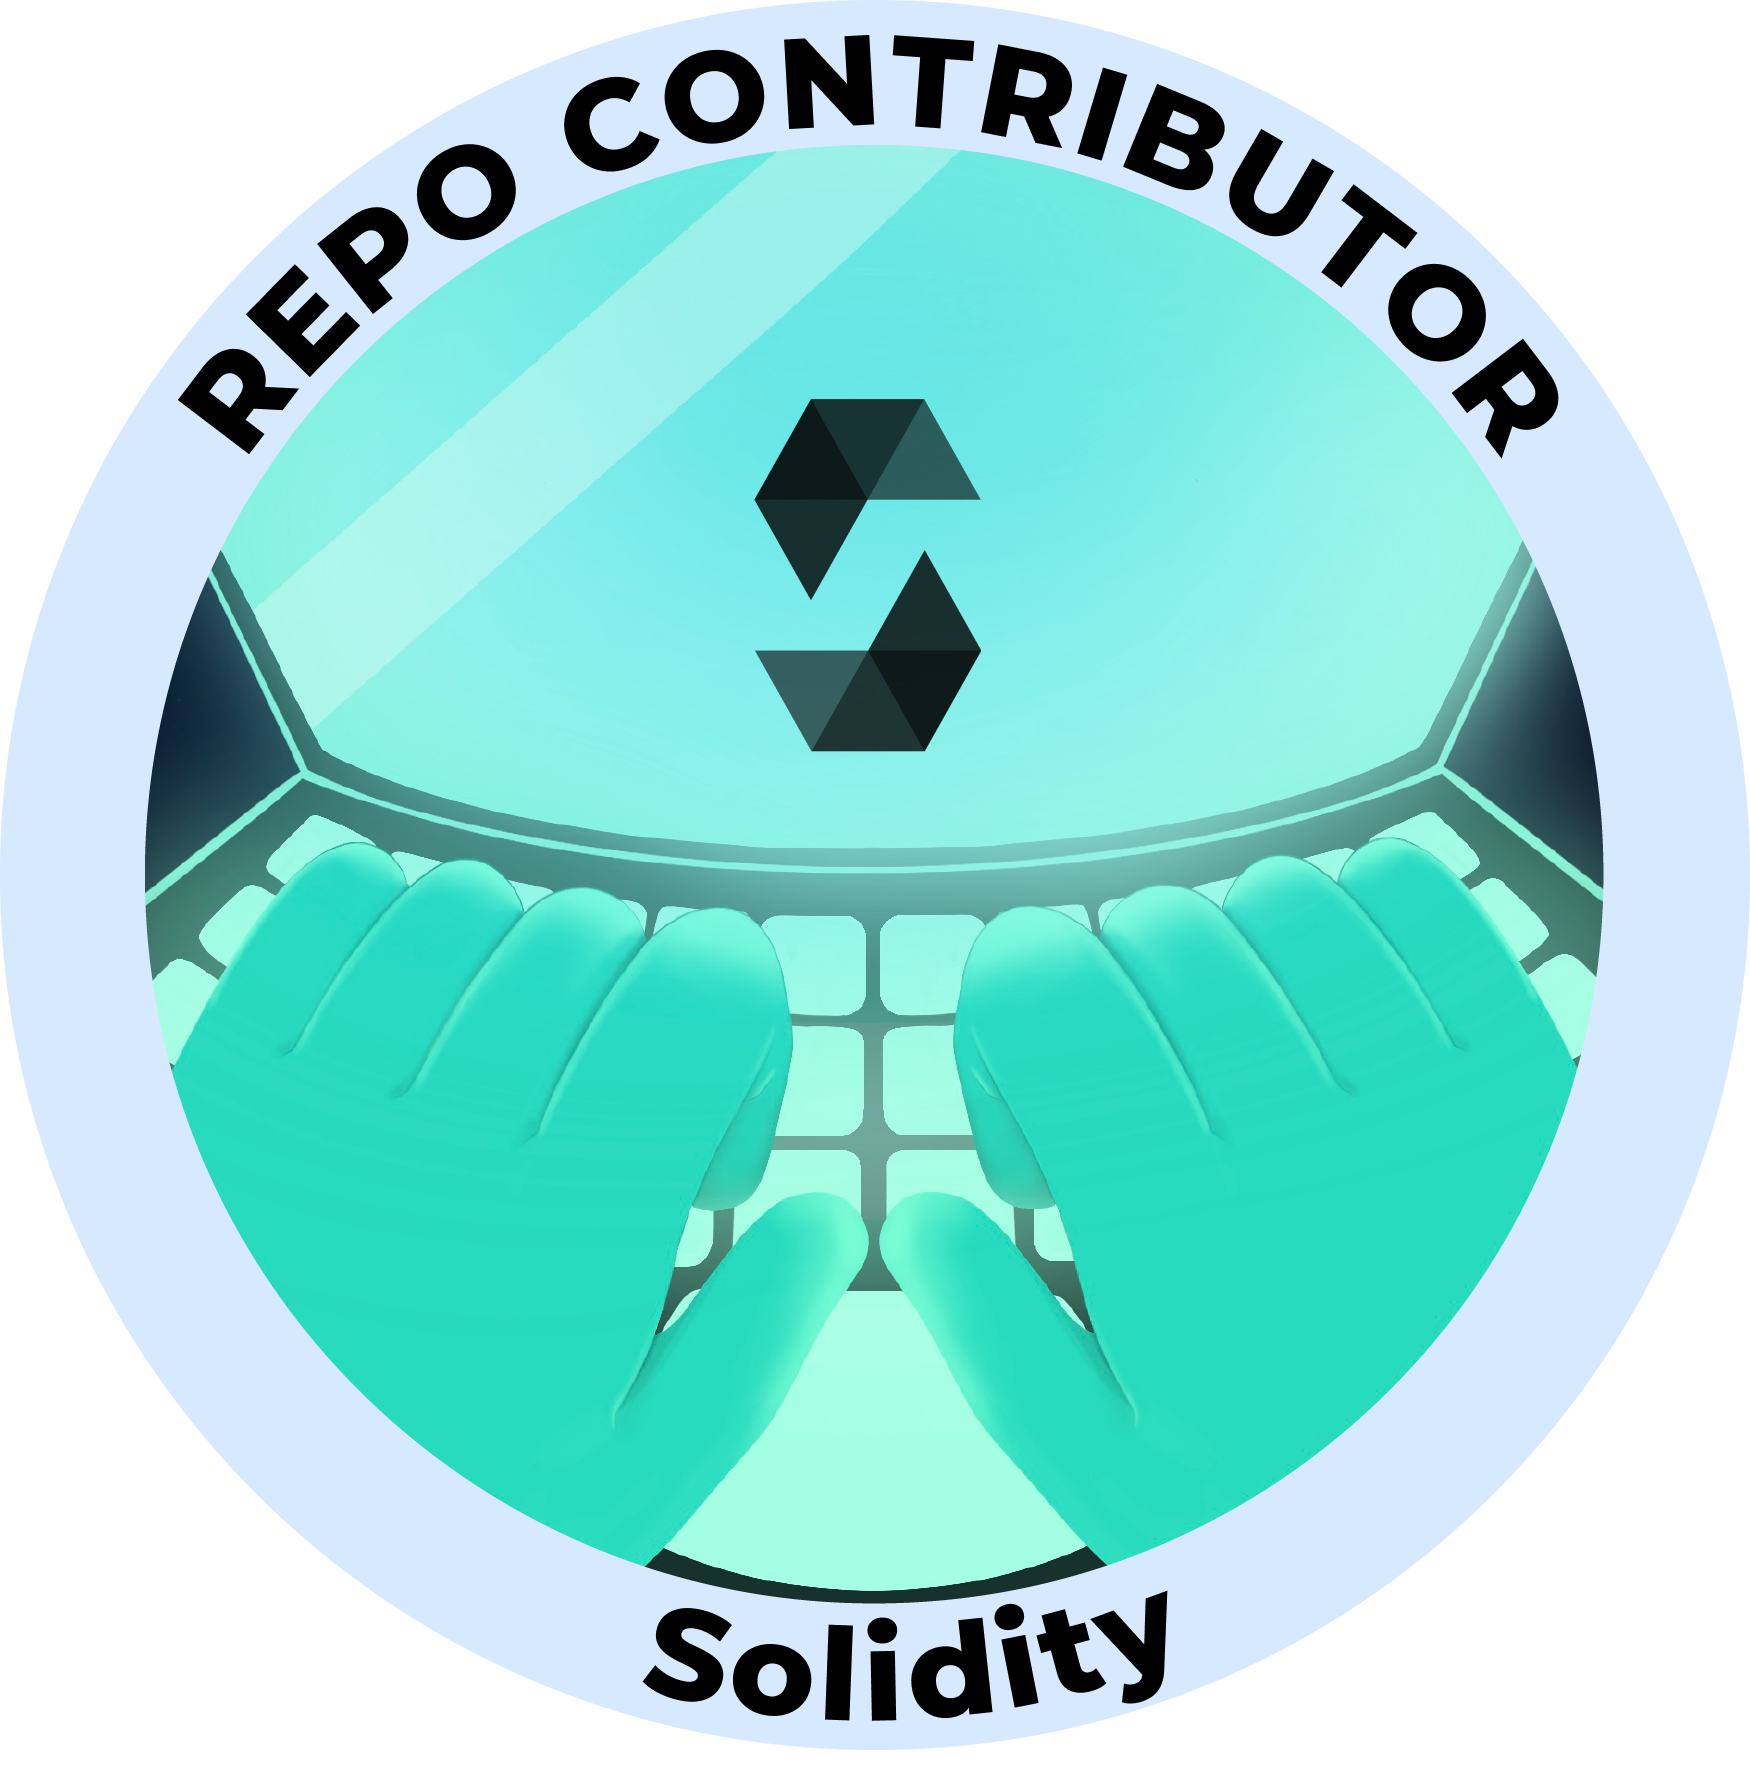 Web3 Badge | Project Contributor: Solidity logo